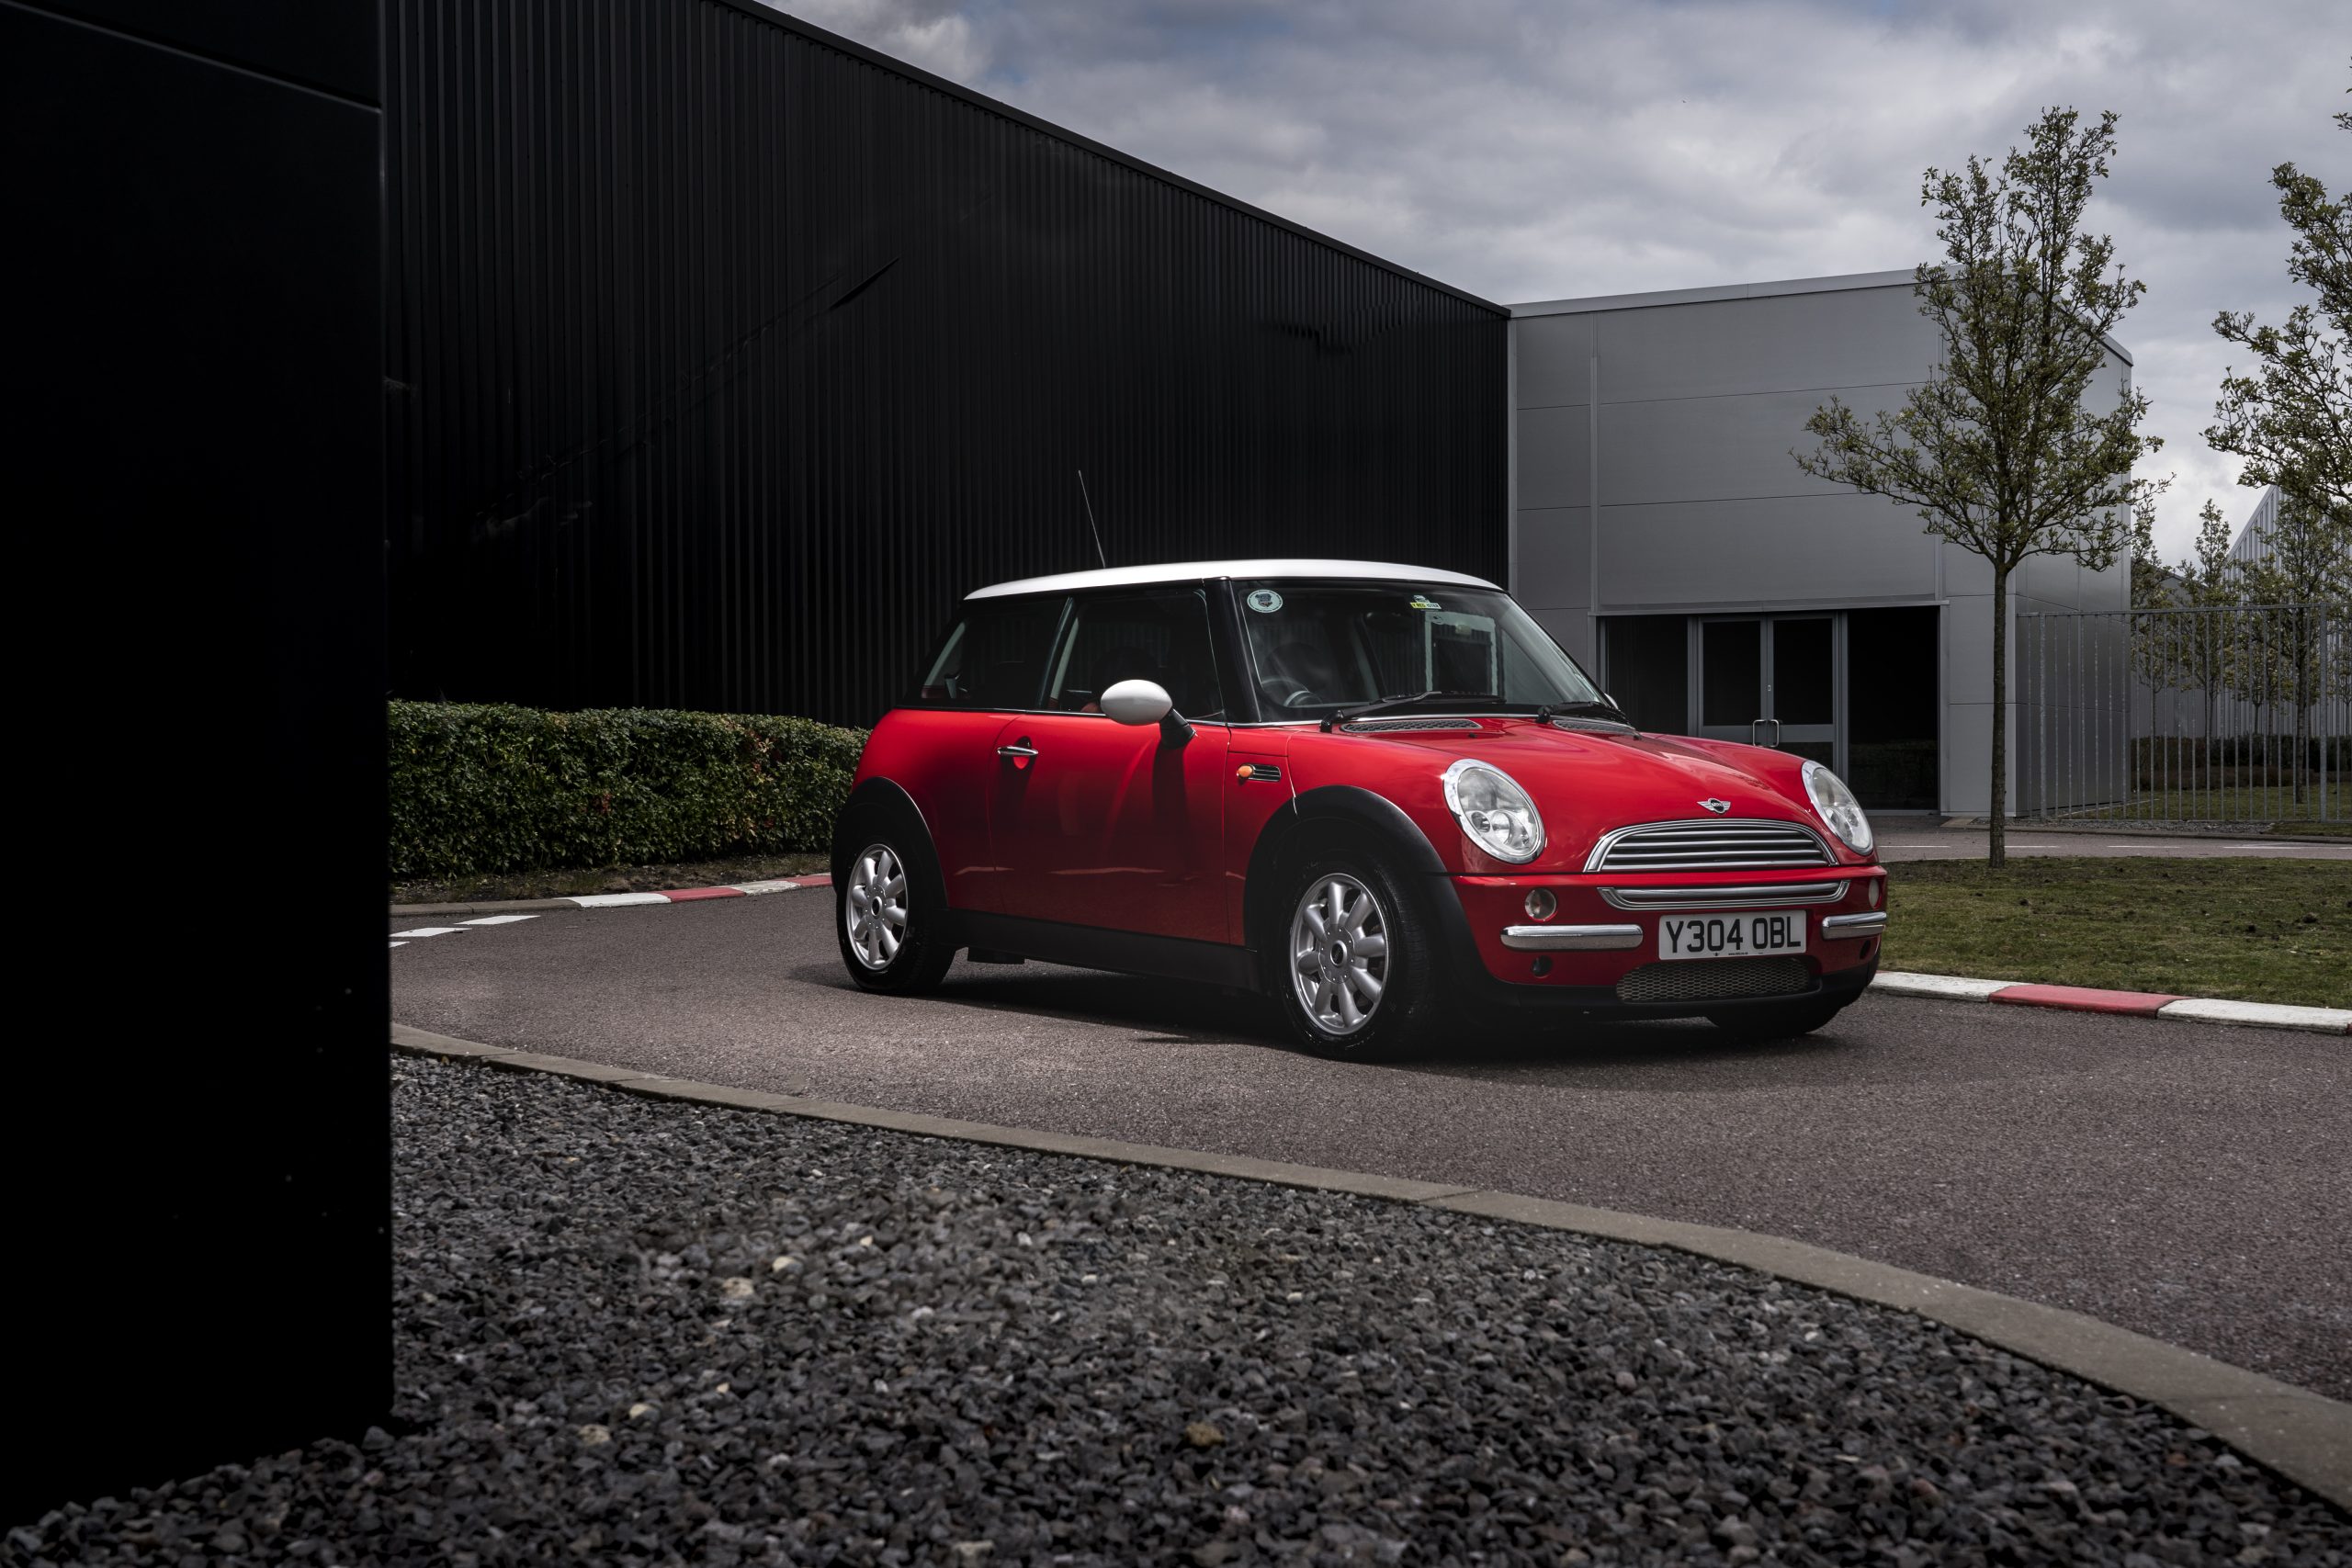 20 facts after 20 fun-filled years of the new Mini